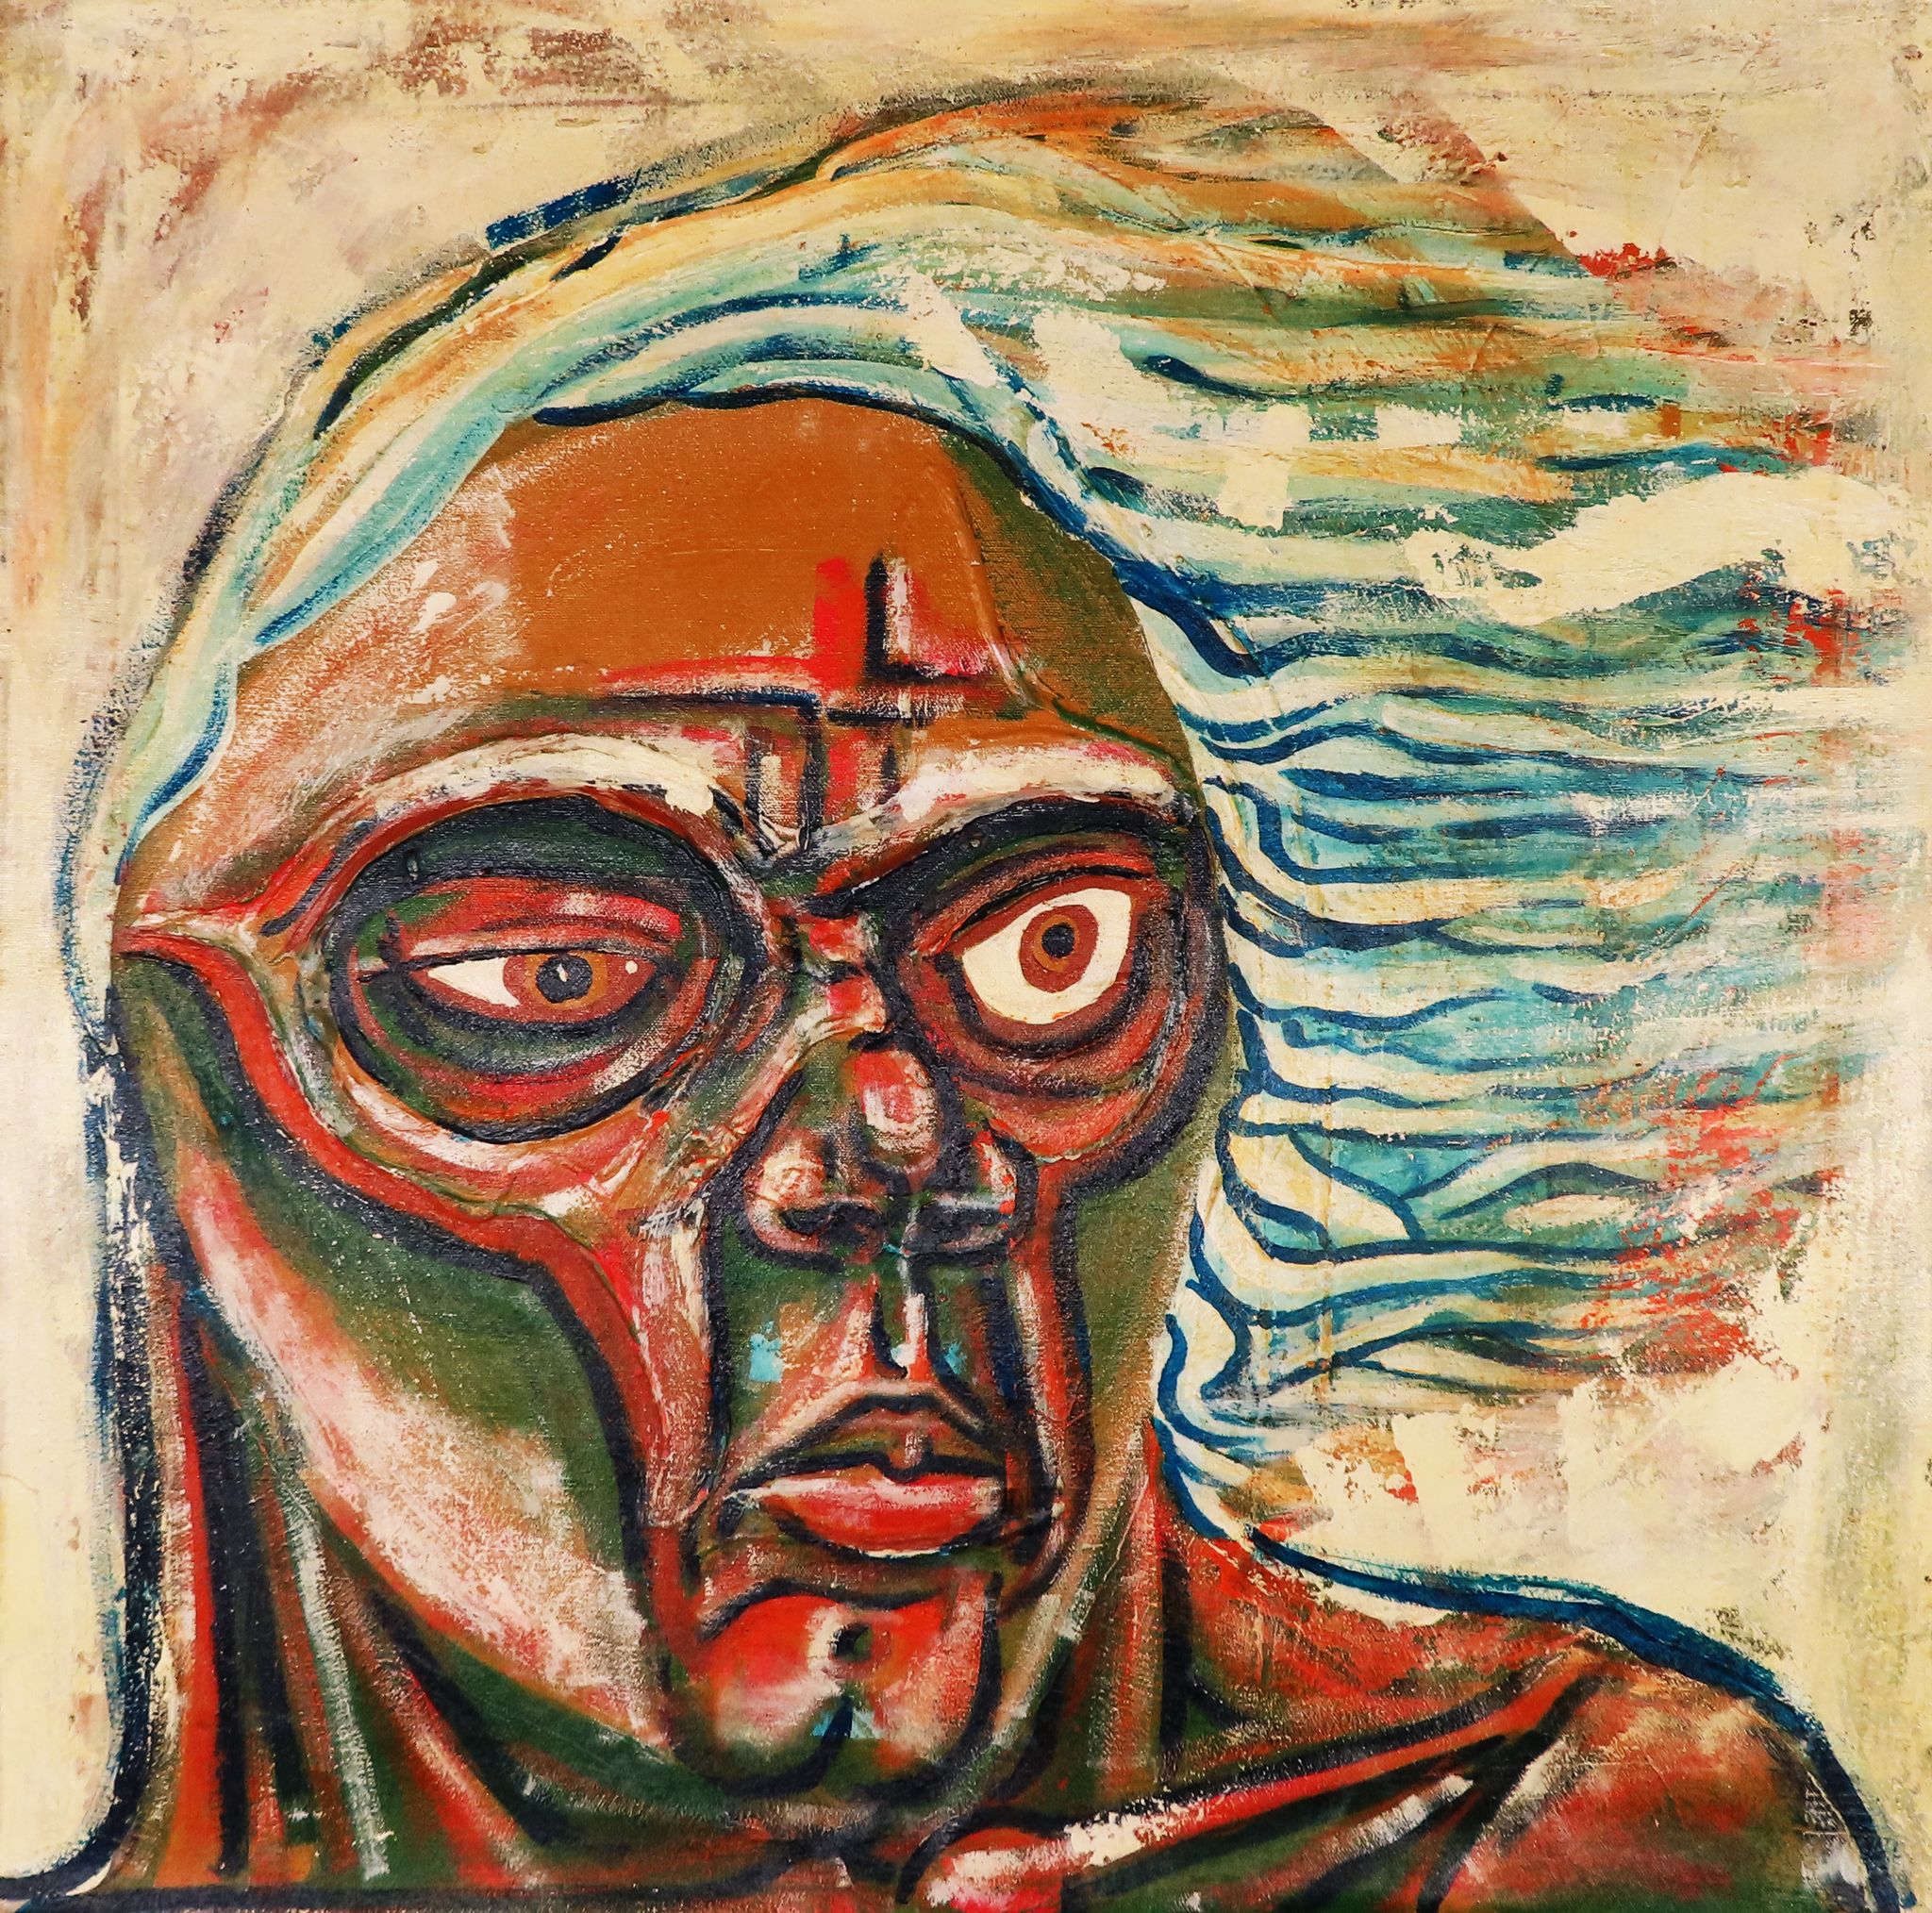 Untitled (Head with Soulful Eyes)